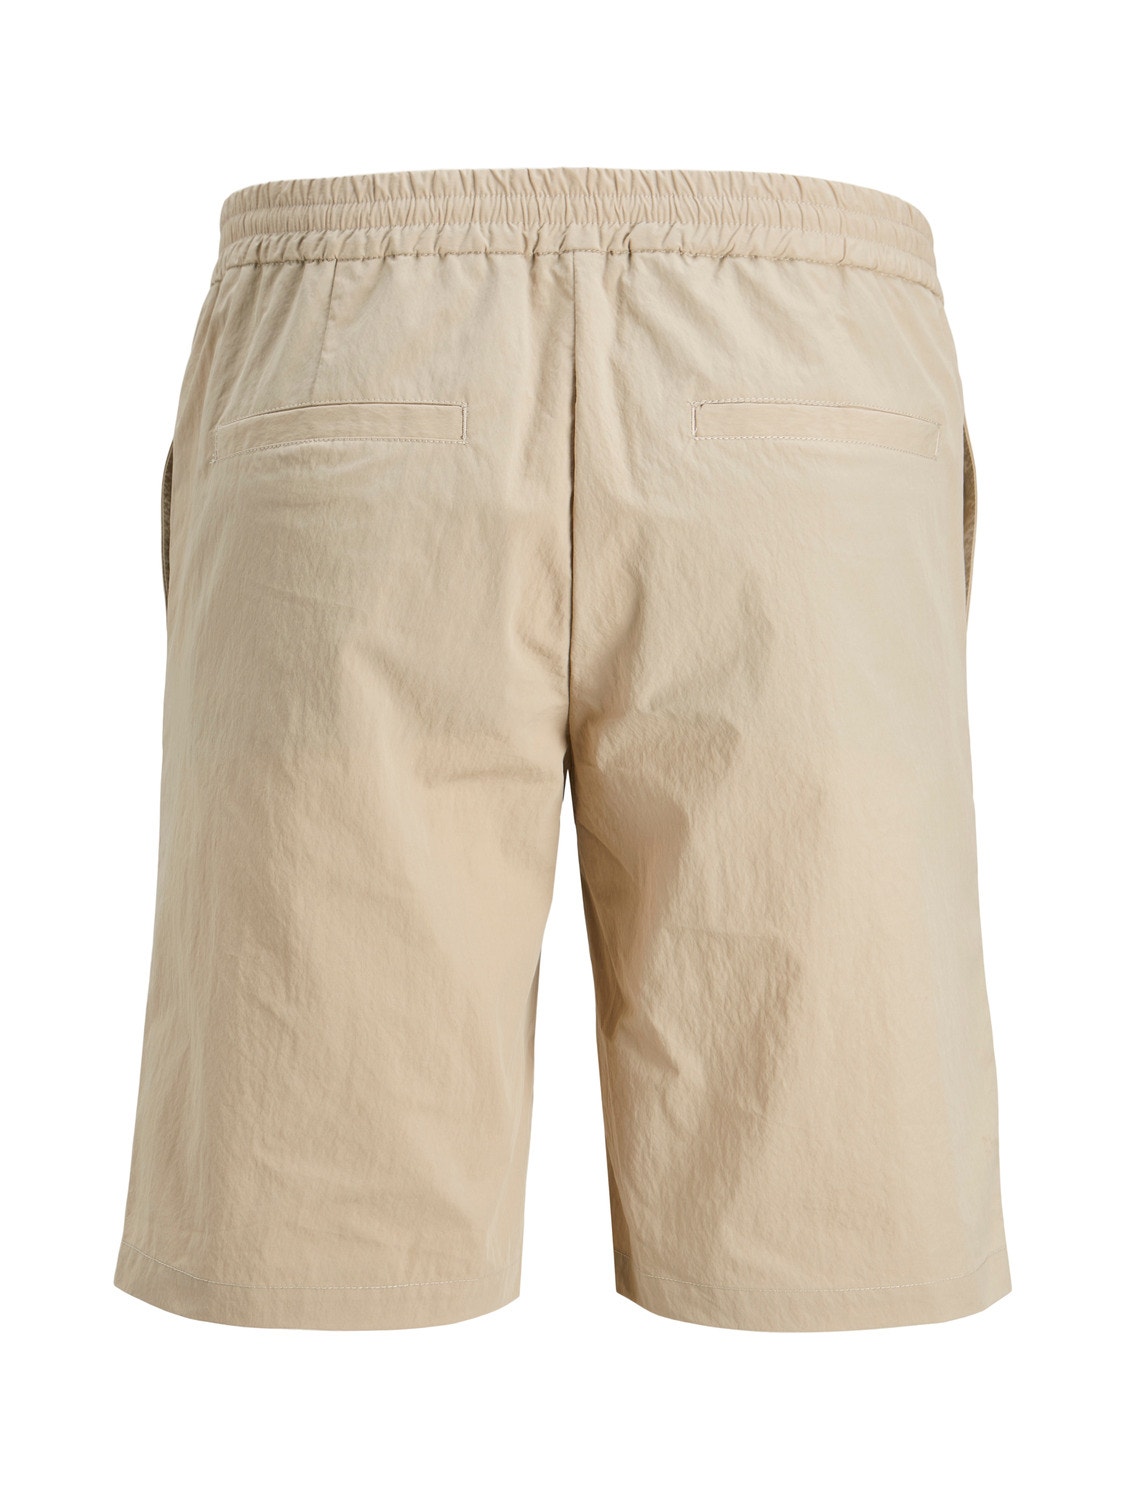 Jack & Jones Slim Fit Tailored shorts -Curds & Whey - 12208556